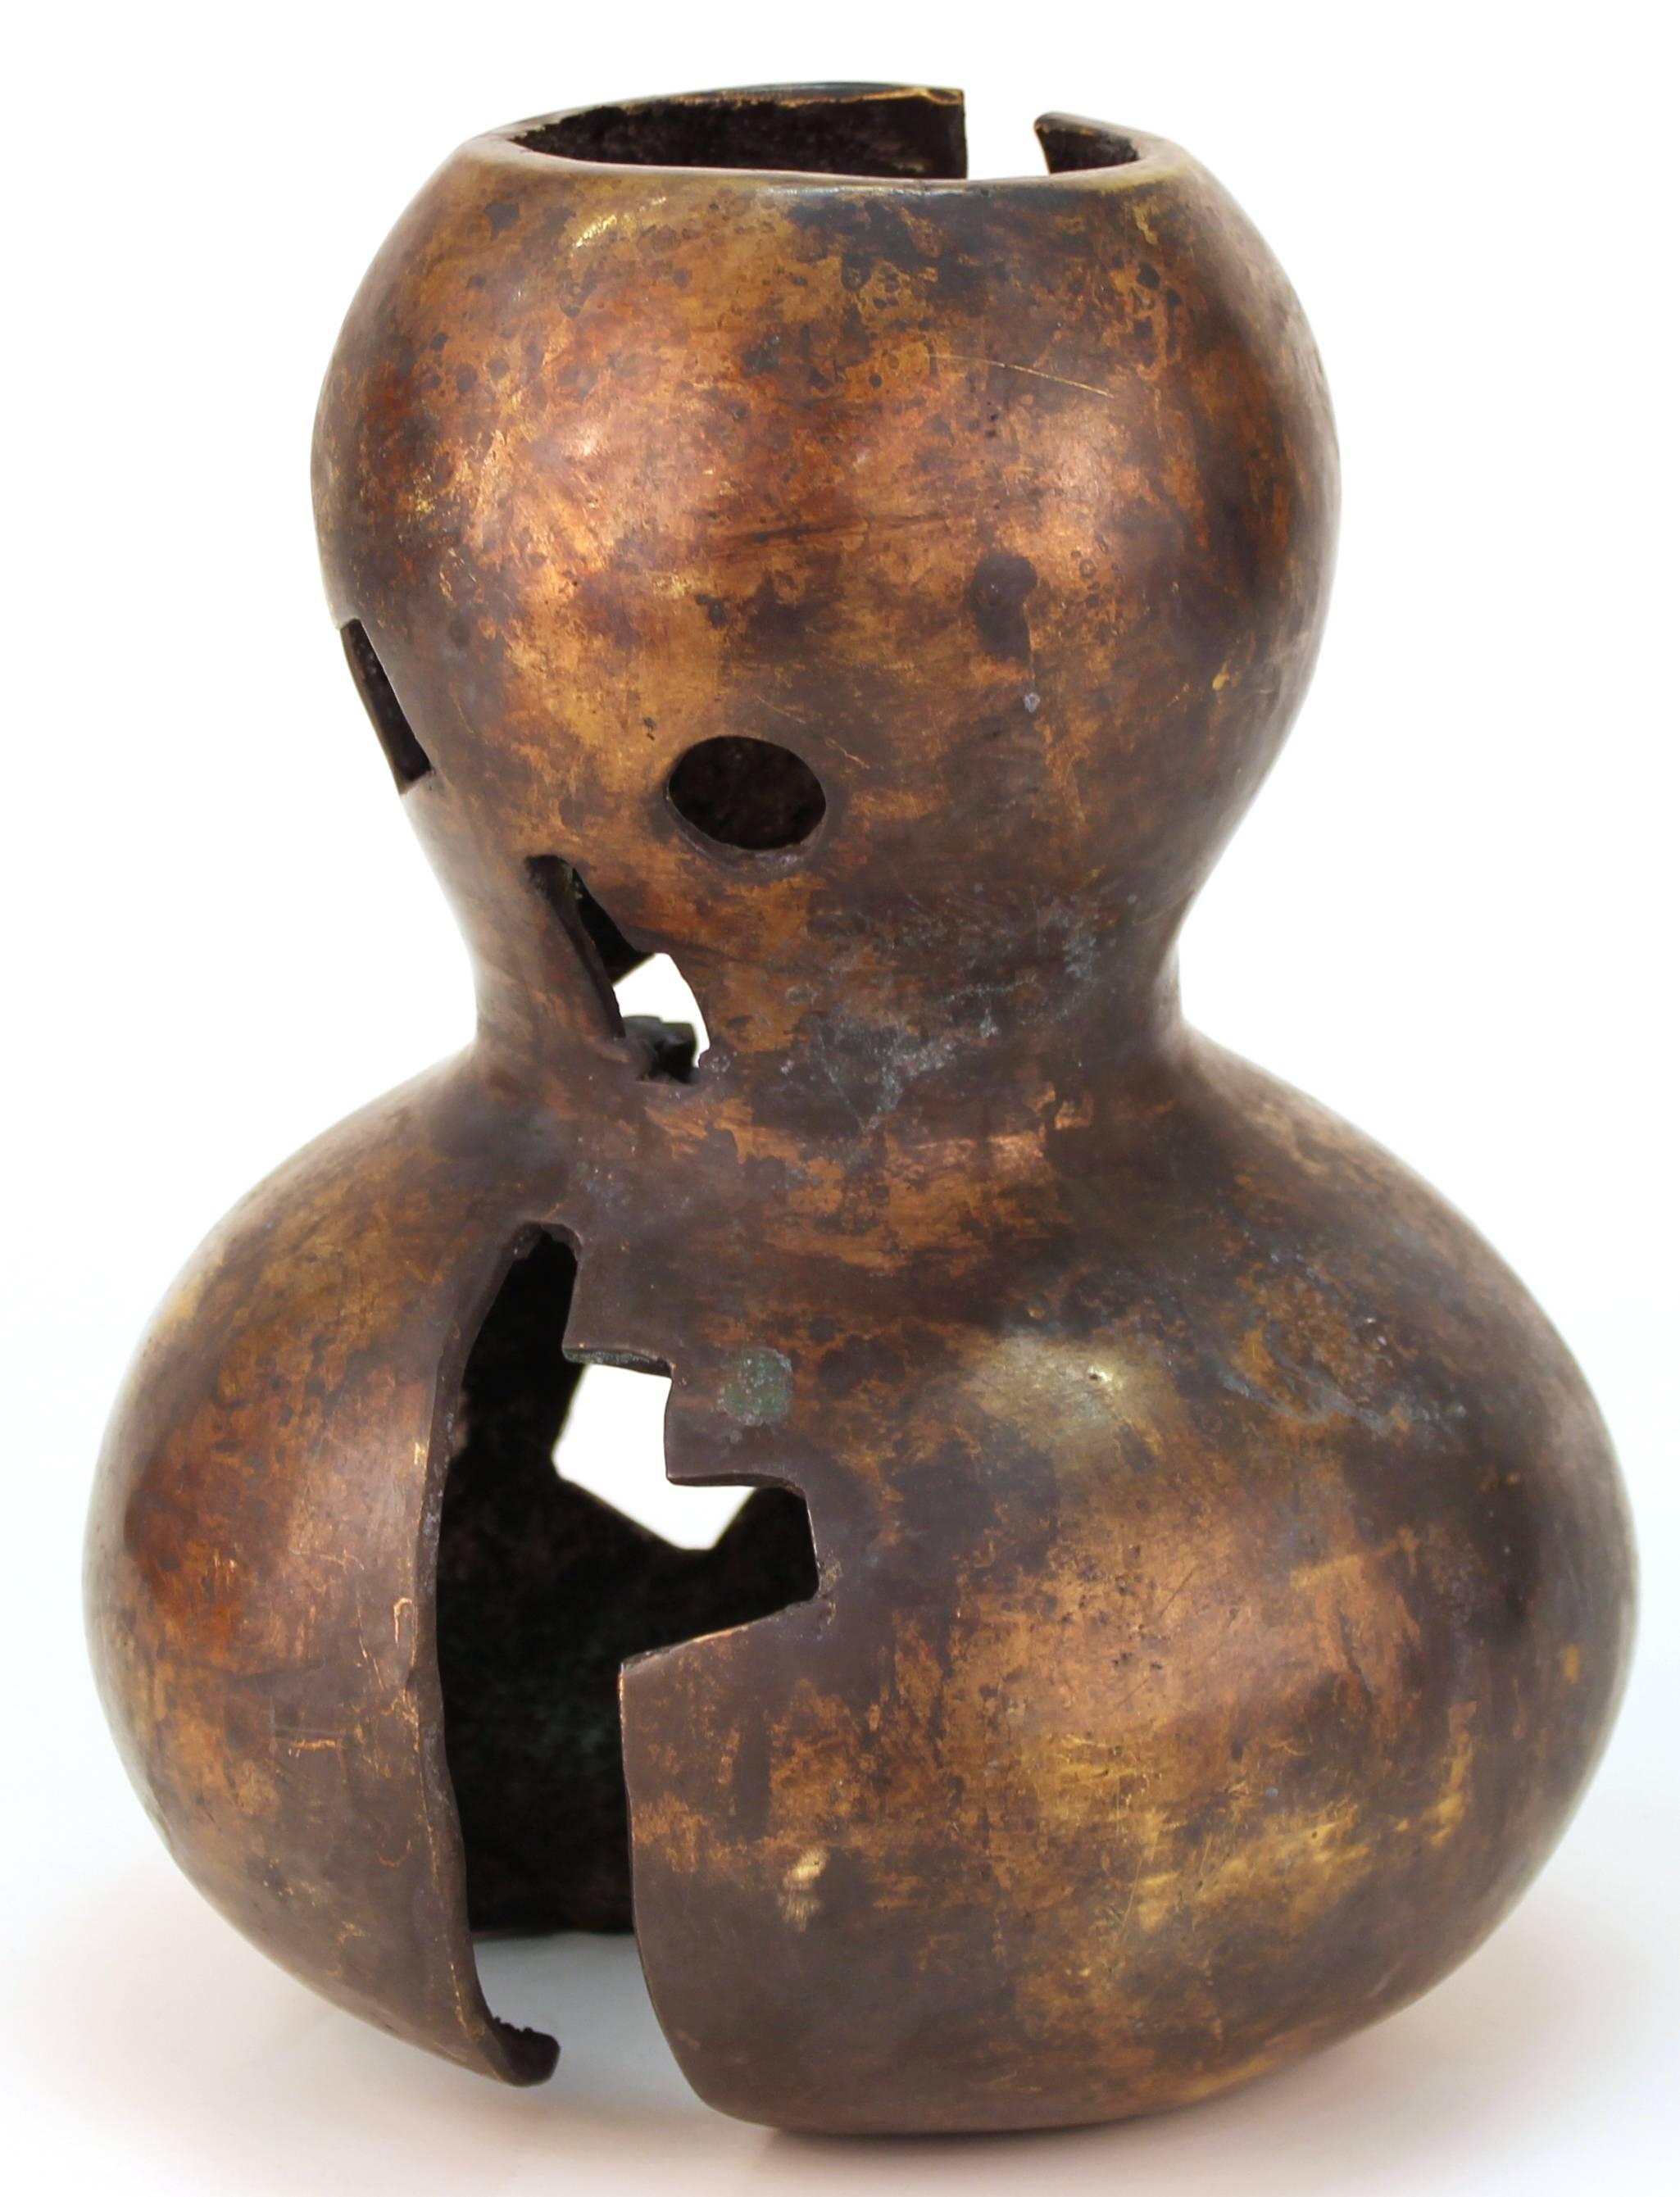 A bronze sculpture of an abstract head shaped figure, made by German-born Mexican artist Mathias Goeritz (1915-1990) in the 1950s-1960s. The piece is initialled [MG.] on the lower bottom half. Some scratches to surface but overall in great vintage